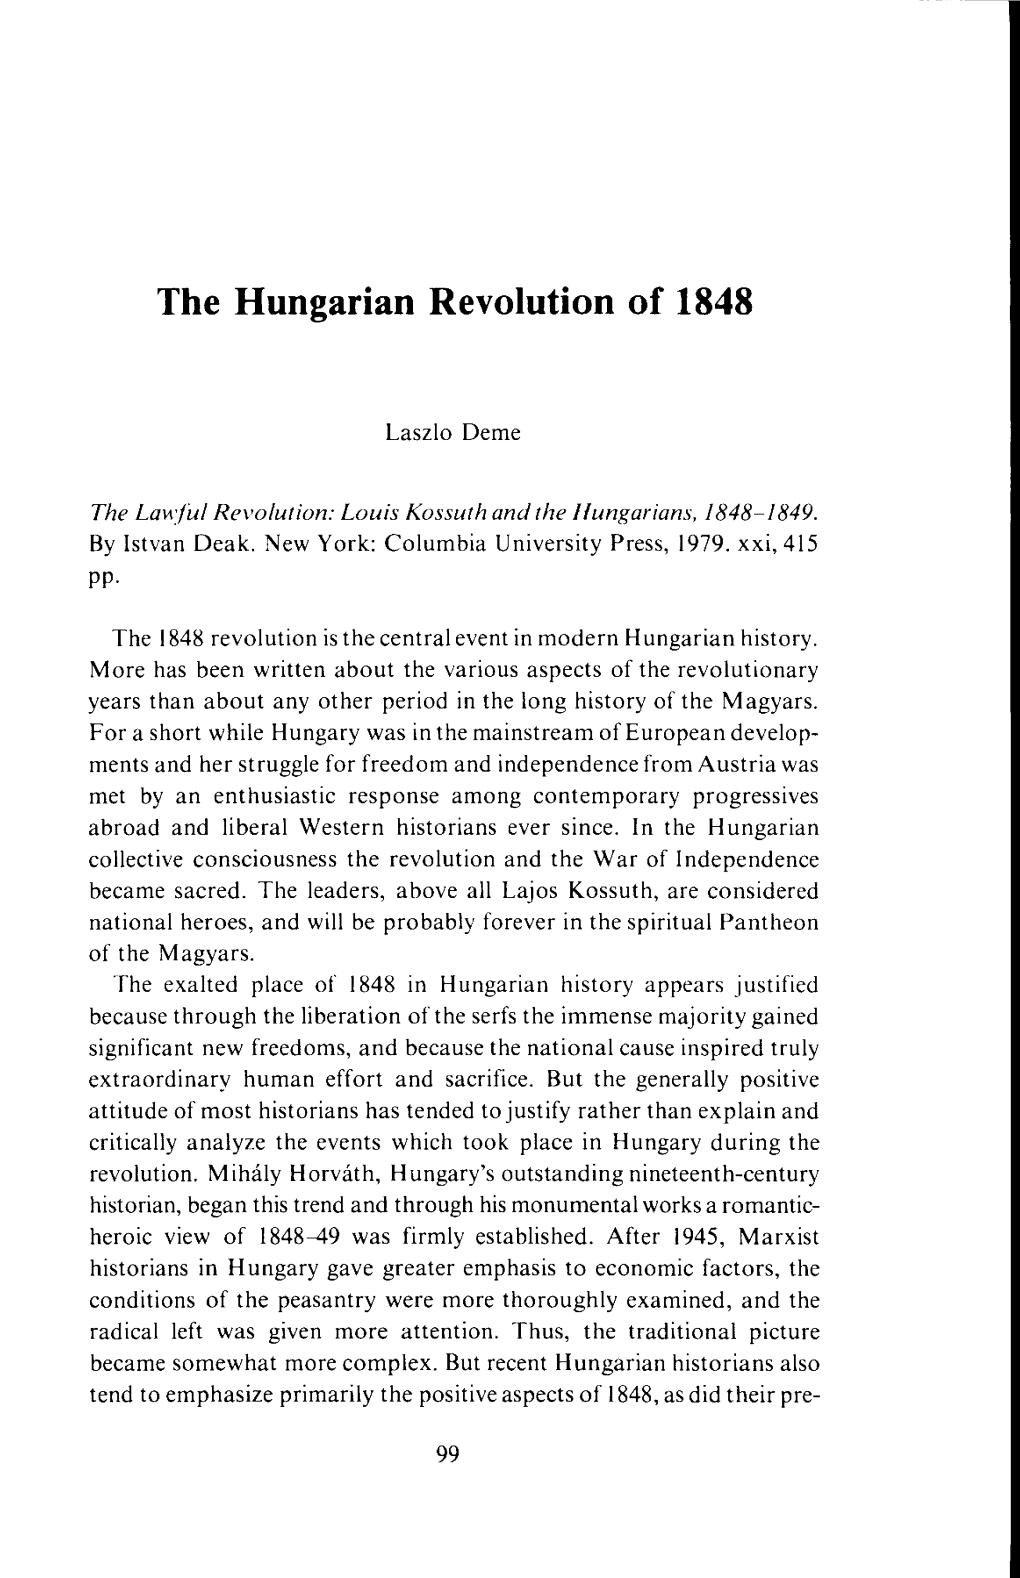 The Hungarian Revolution of 1848